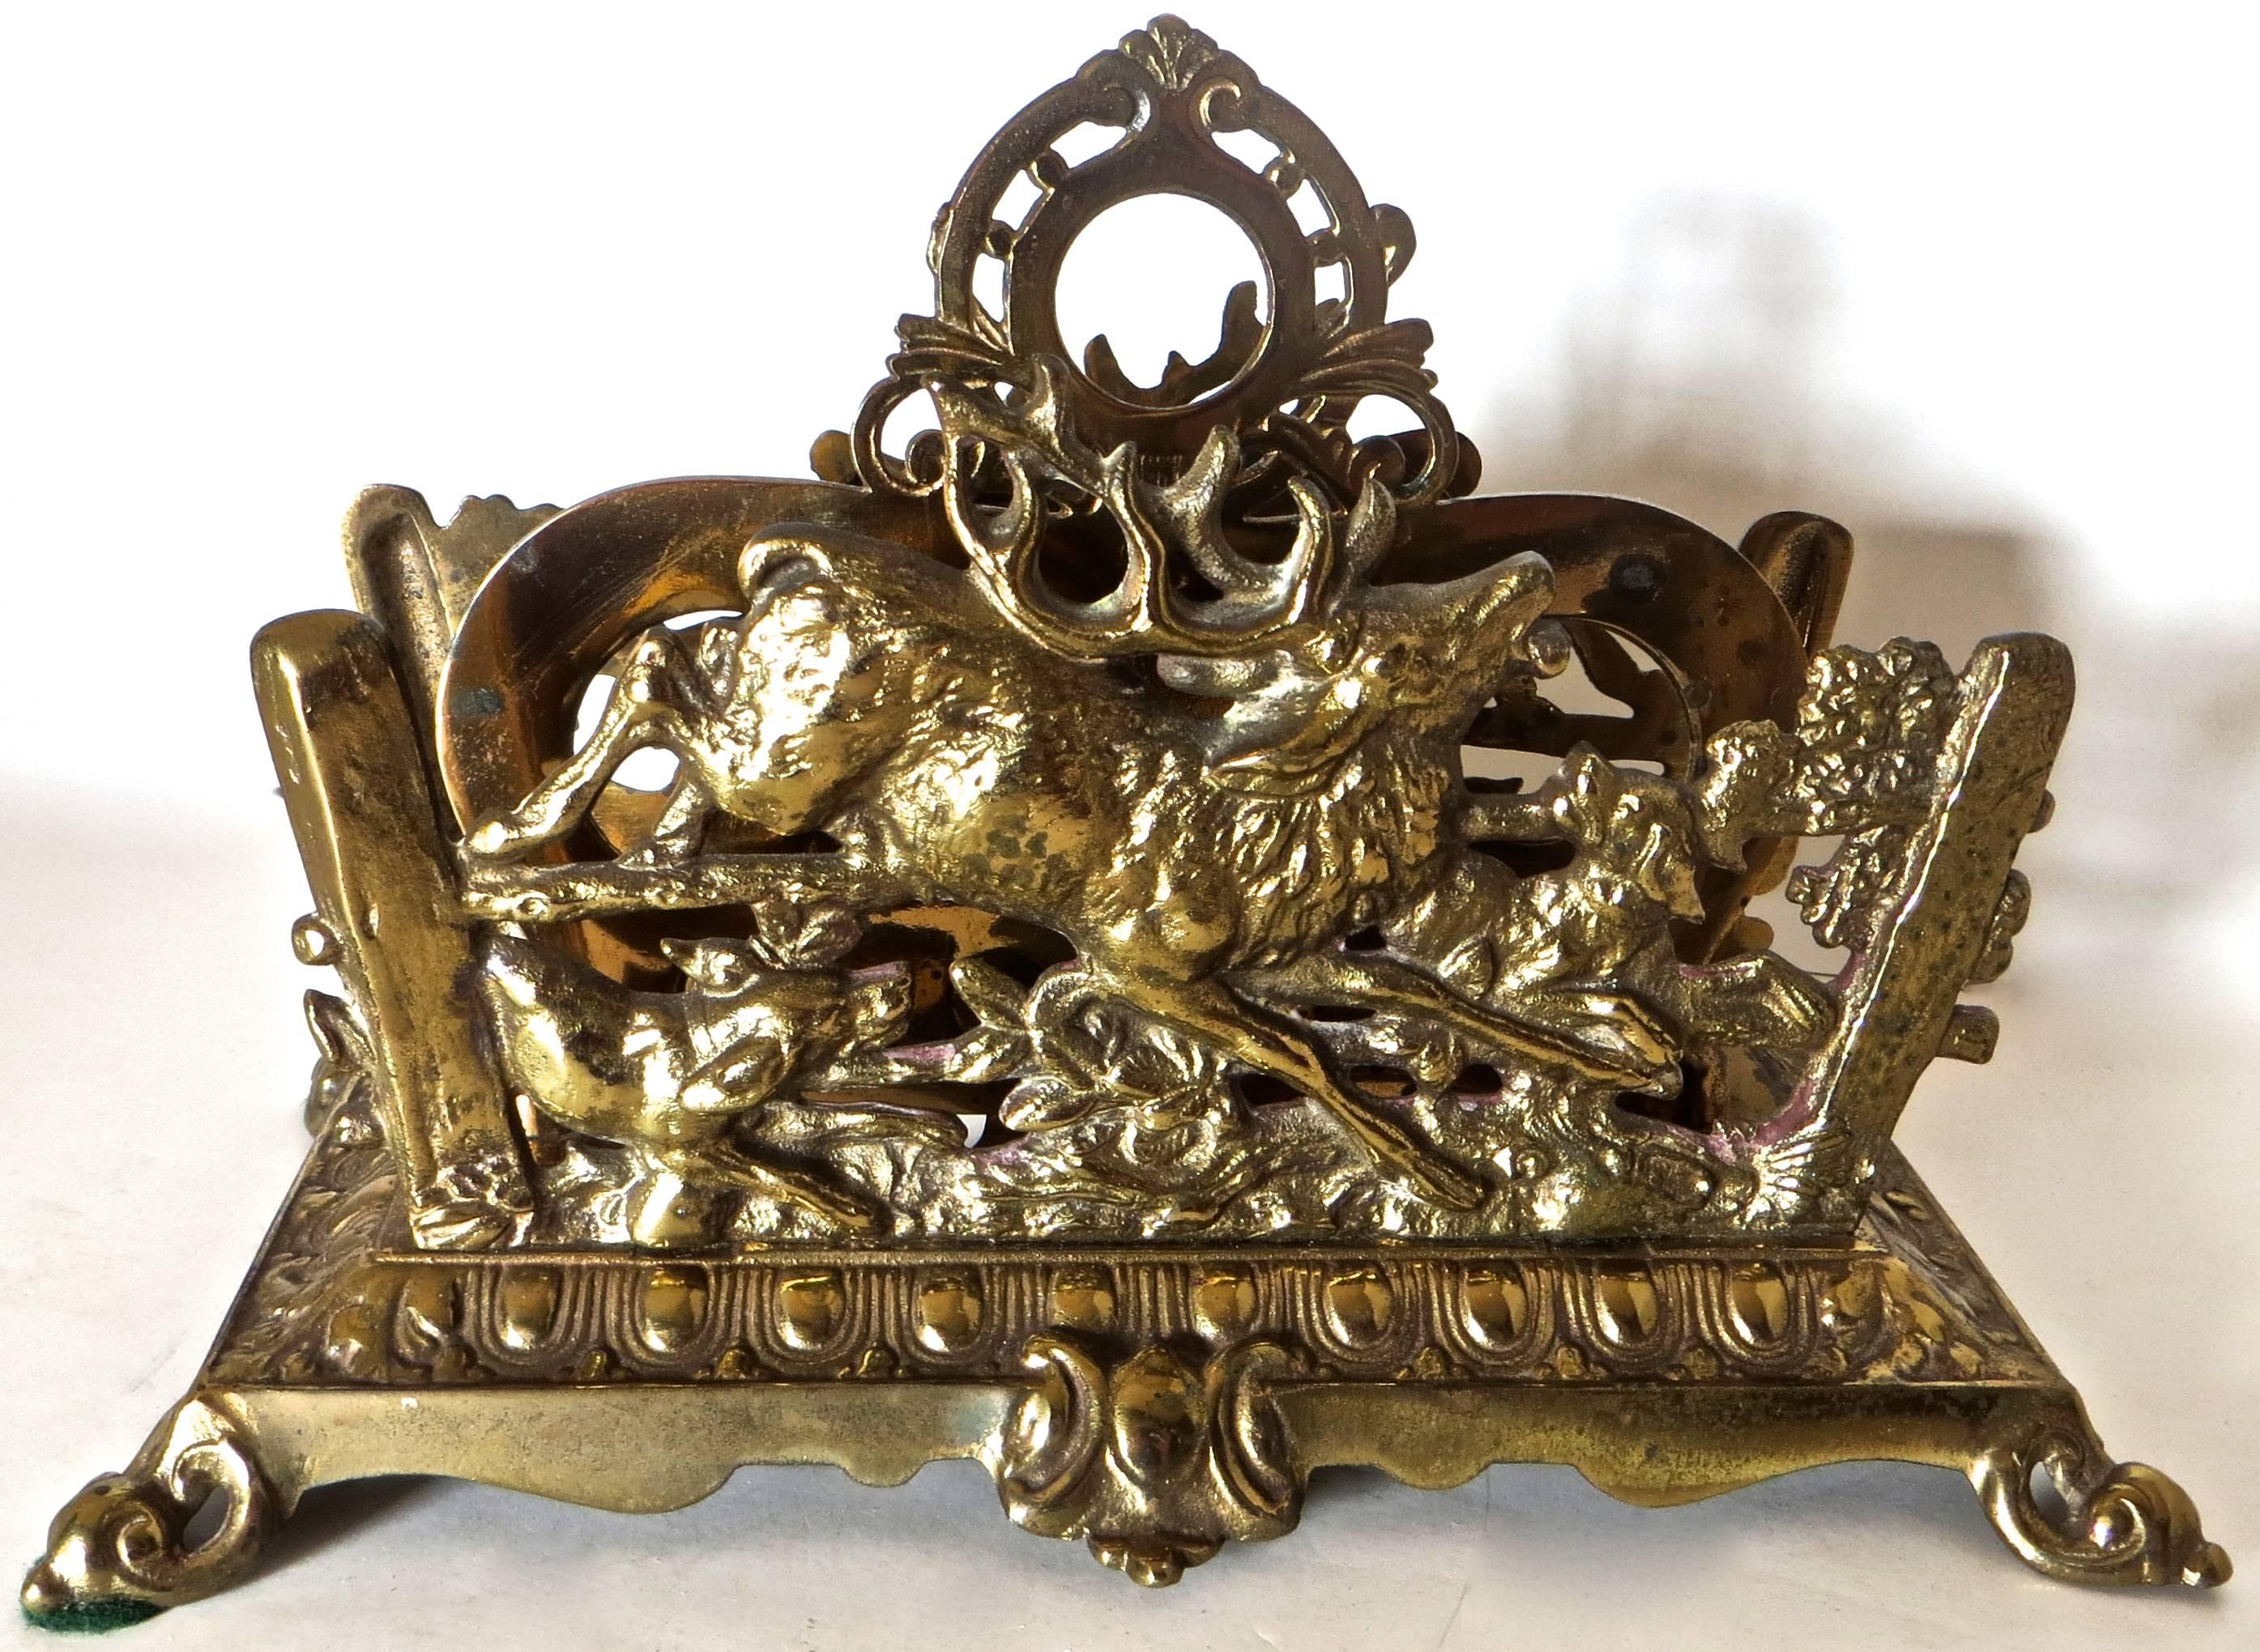 Brass-plated cast iron letter holder portraying a hunt scene with a deer and hunting dogs on each side of the two sectional desk piece with a decorative floral finial design. Fencing and foliage are also part of the design along with six decorative